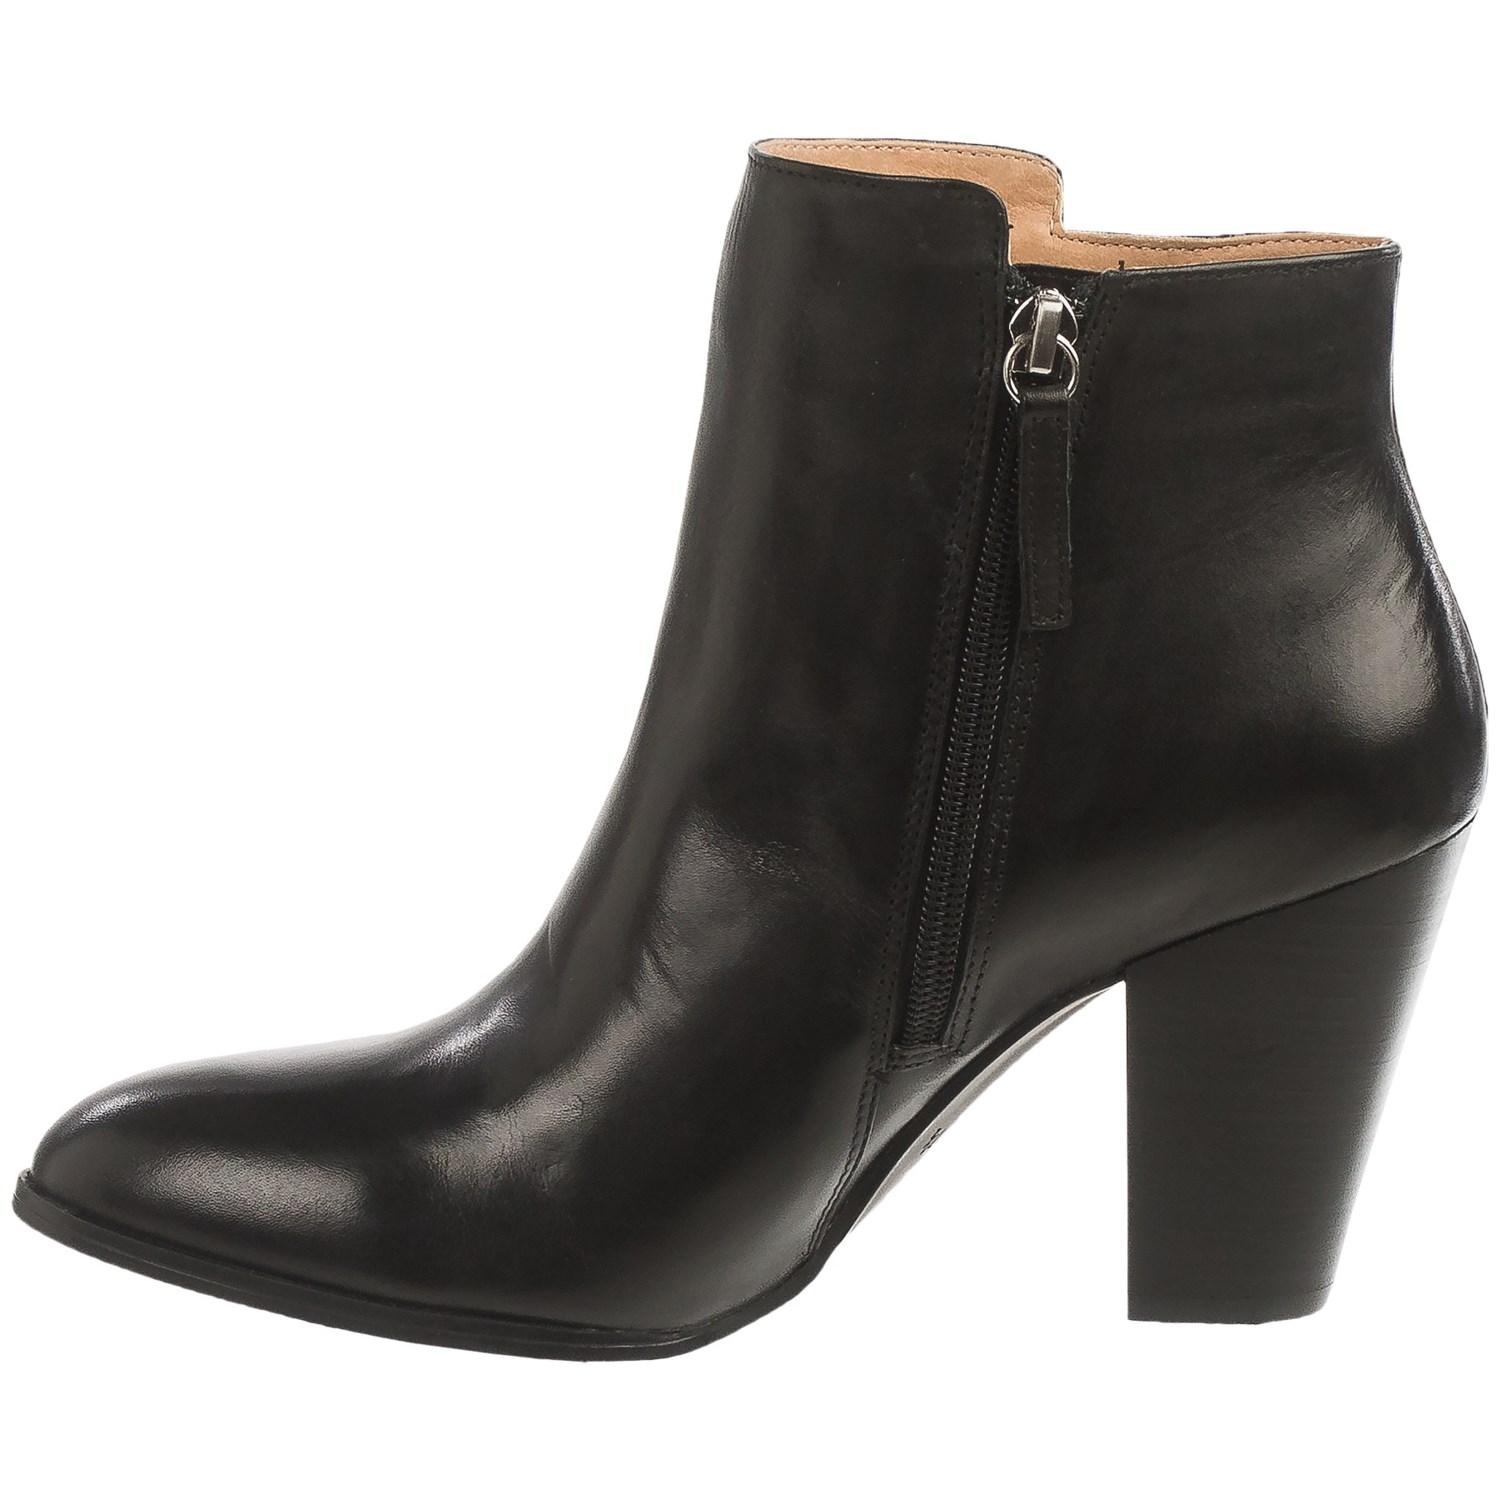 Adrienne Vittadini Beah Ankle Boots (For Women) - Save 83%